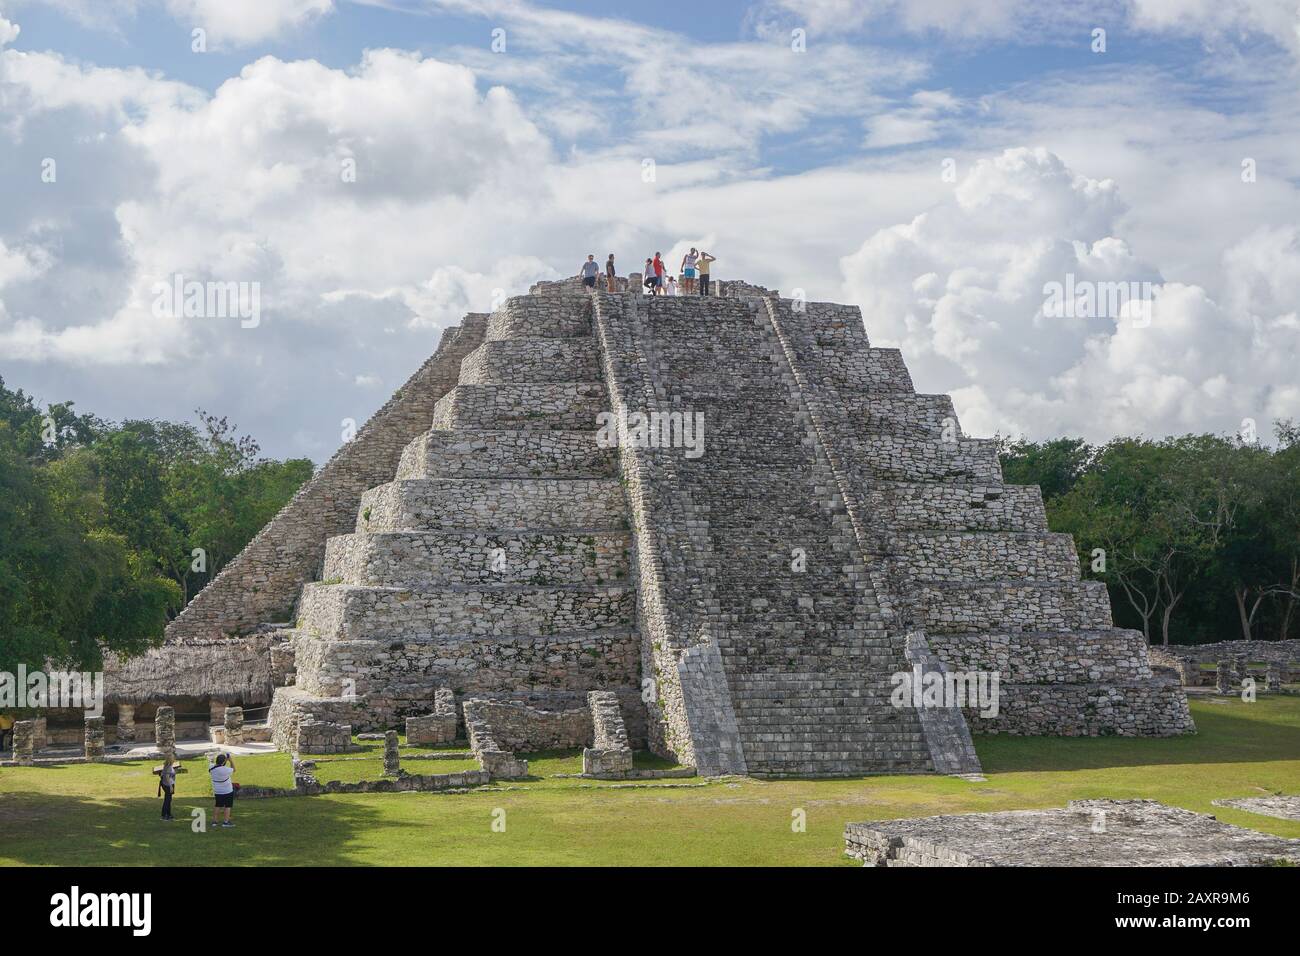 Mayapan, Mexico: Tourists visit the Mayan Temple of Kukulcan in Mayapan, the capital of the Maya in the Yucatán from the 1220s until the 1440s. Stock Photo